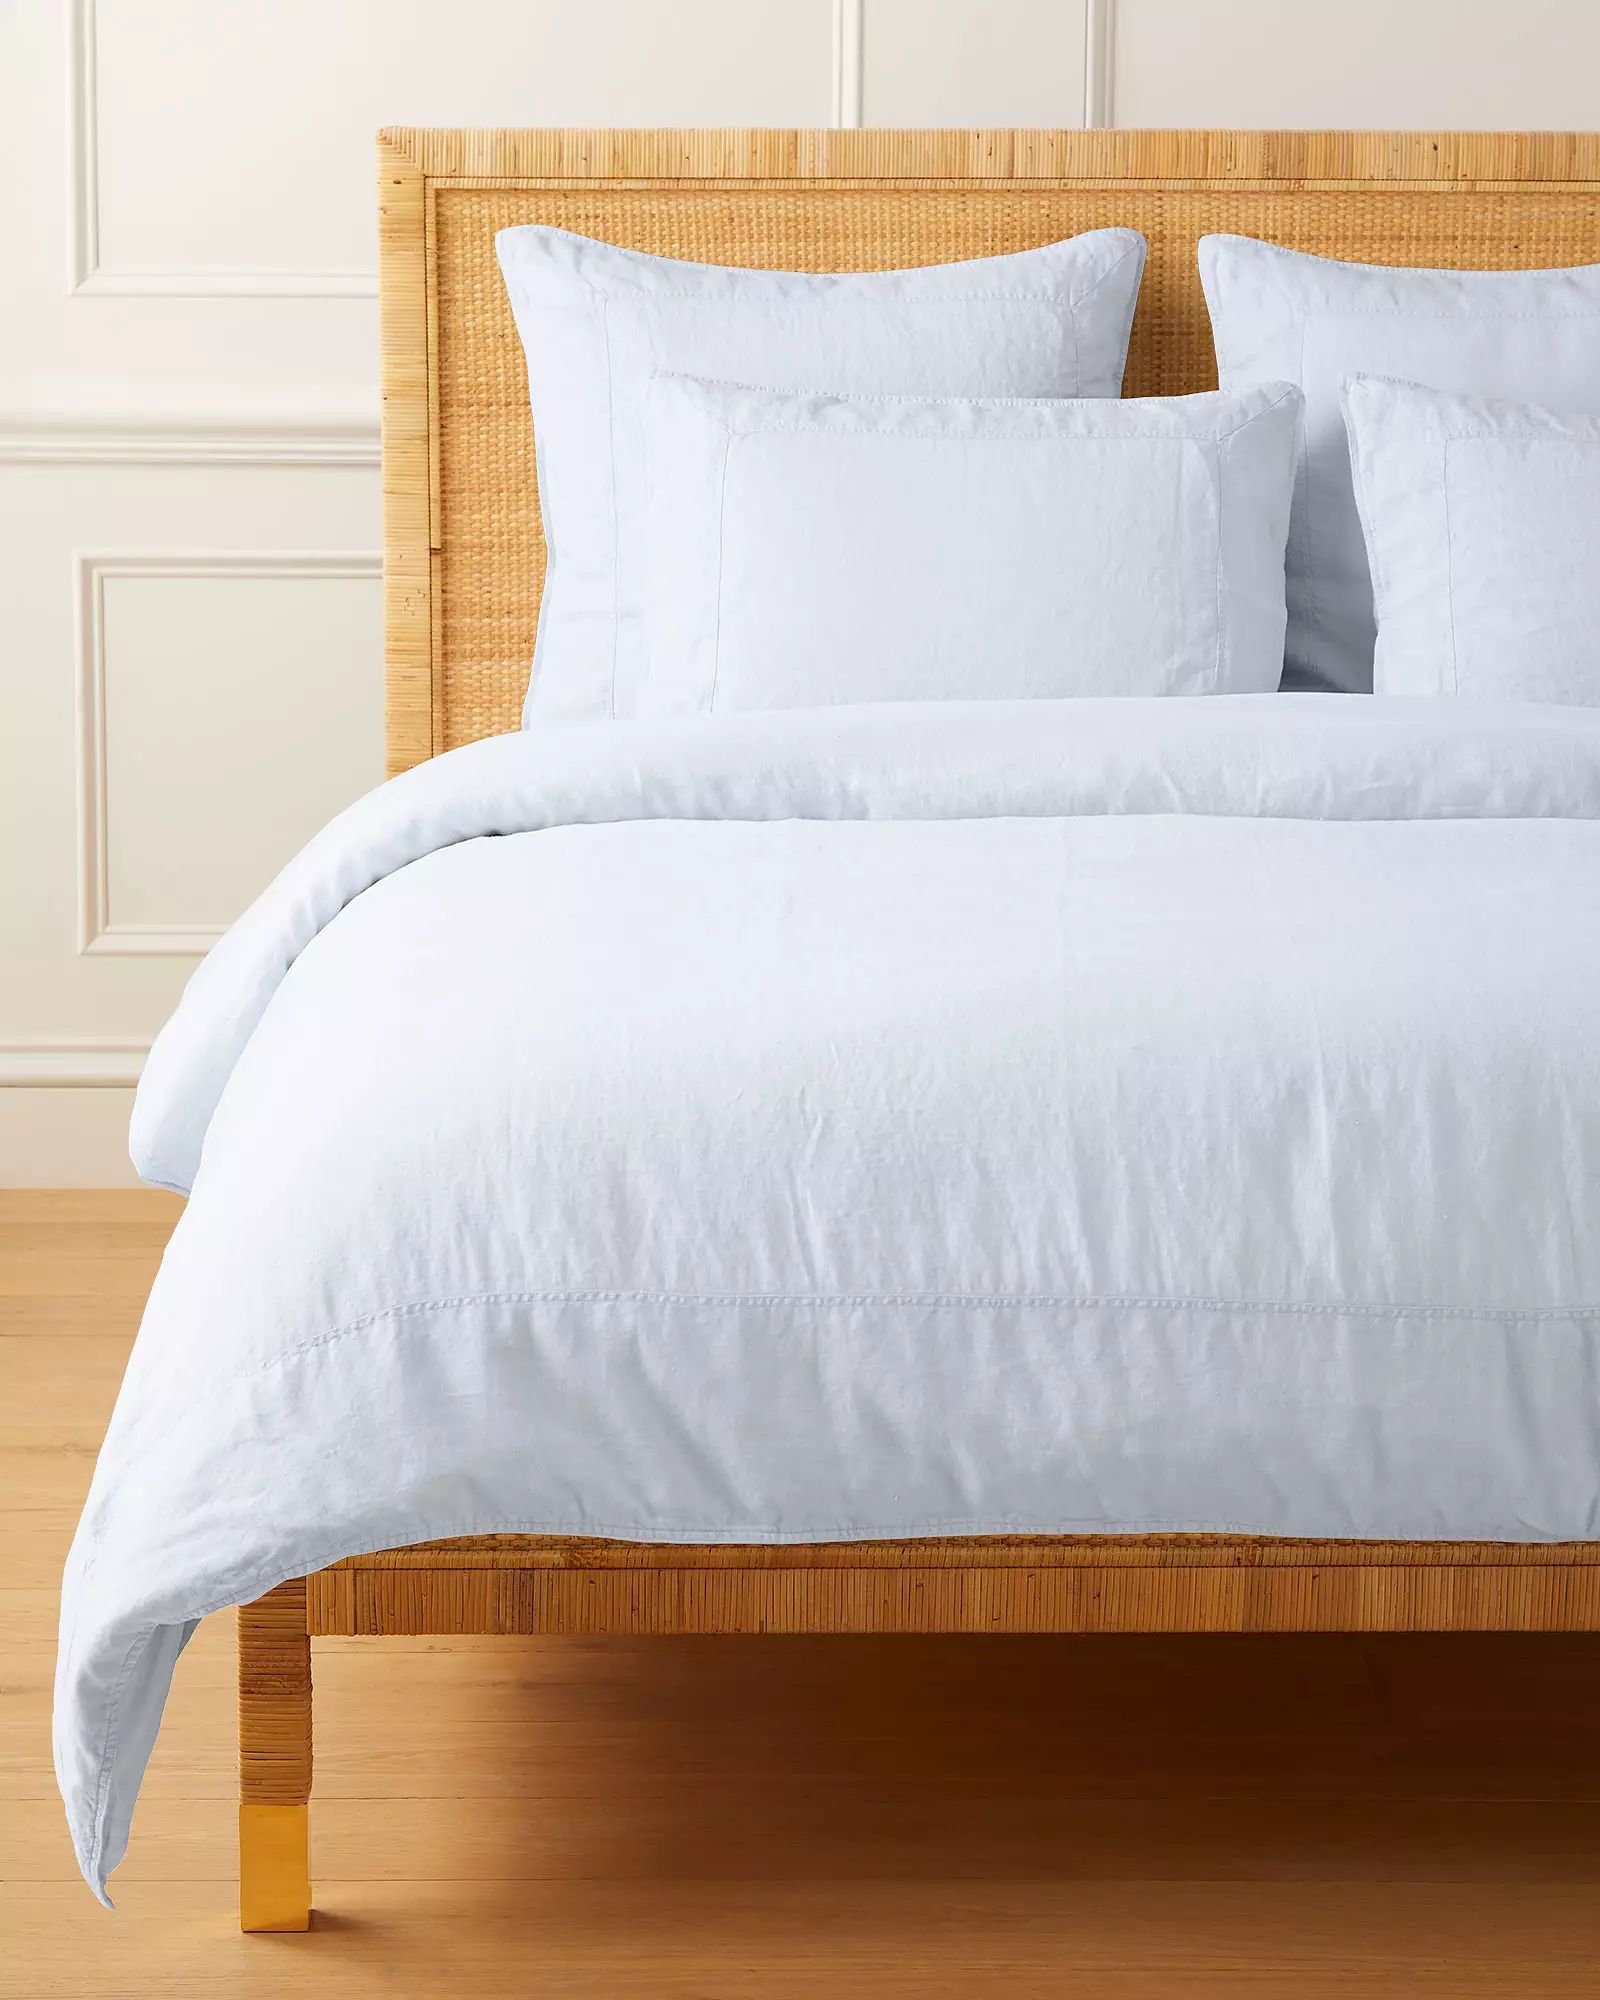 Positano Linen Duvet Cover | Serena and Lily